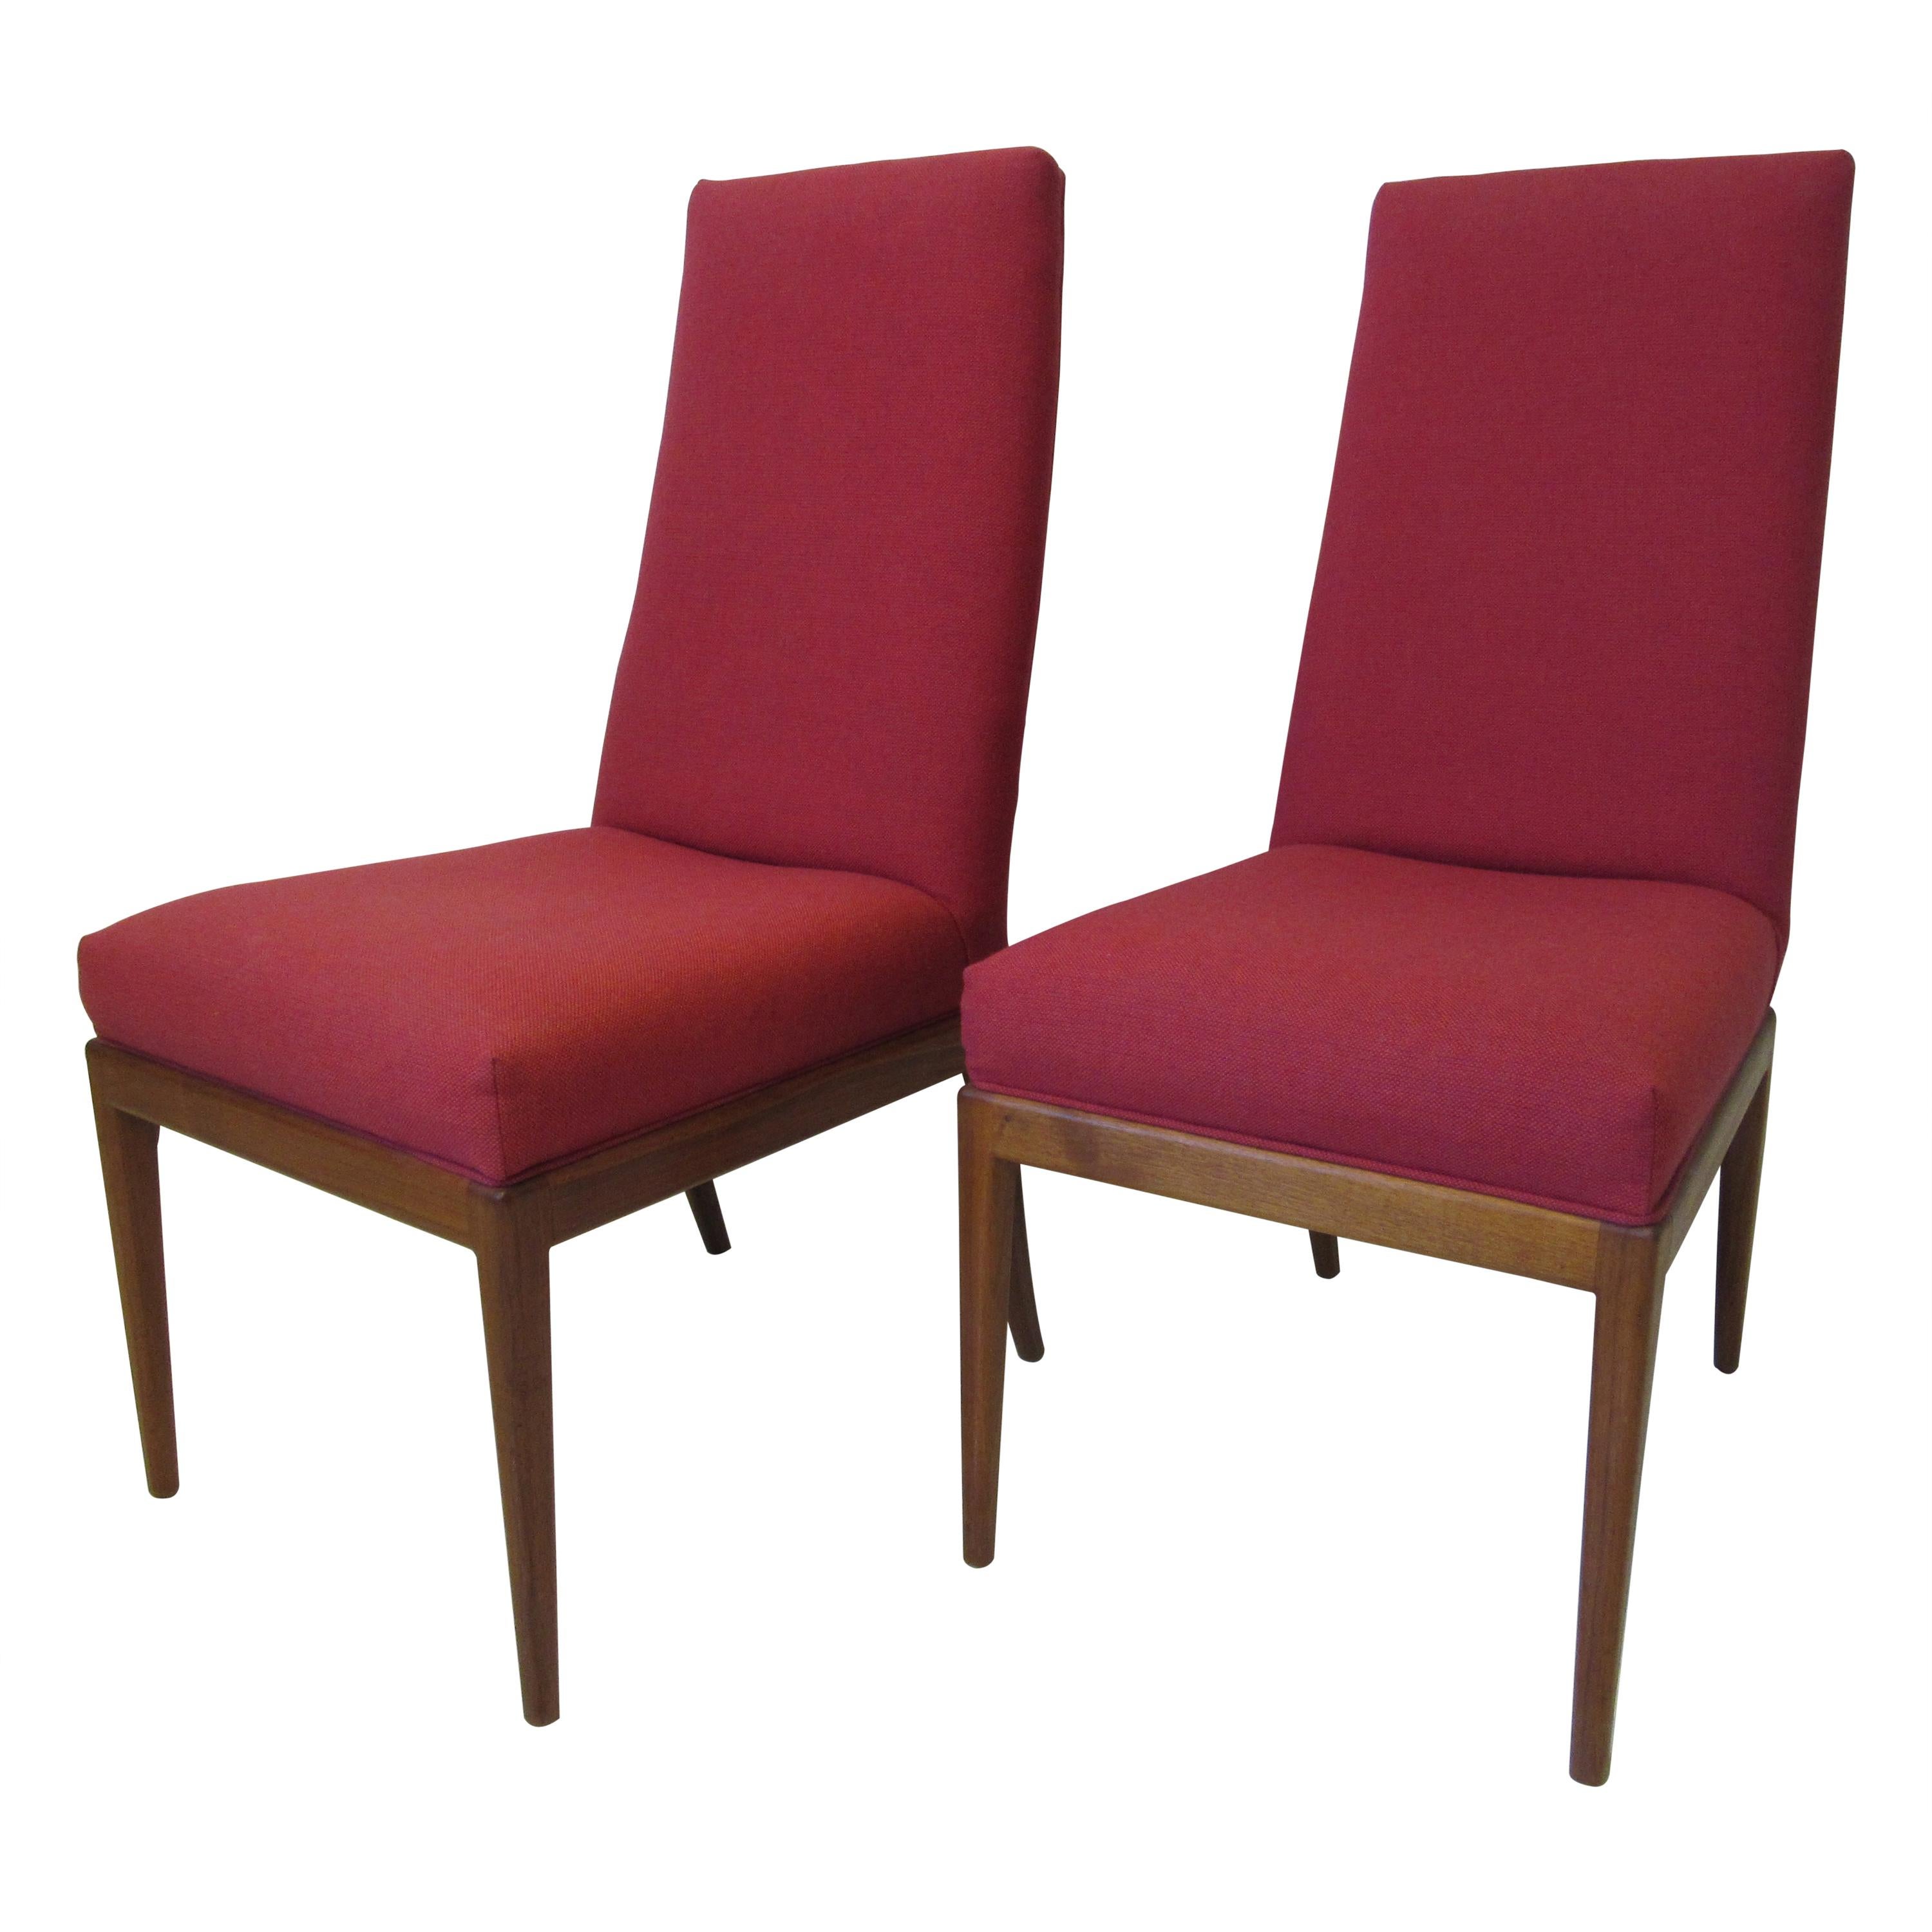 Teak Upholstered High Back Dining Chairs